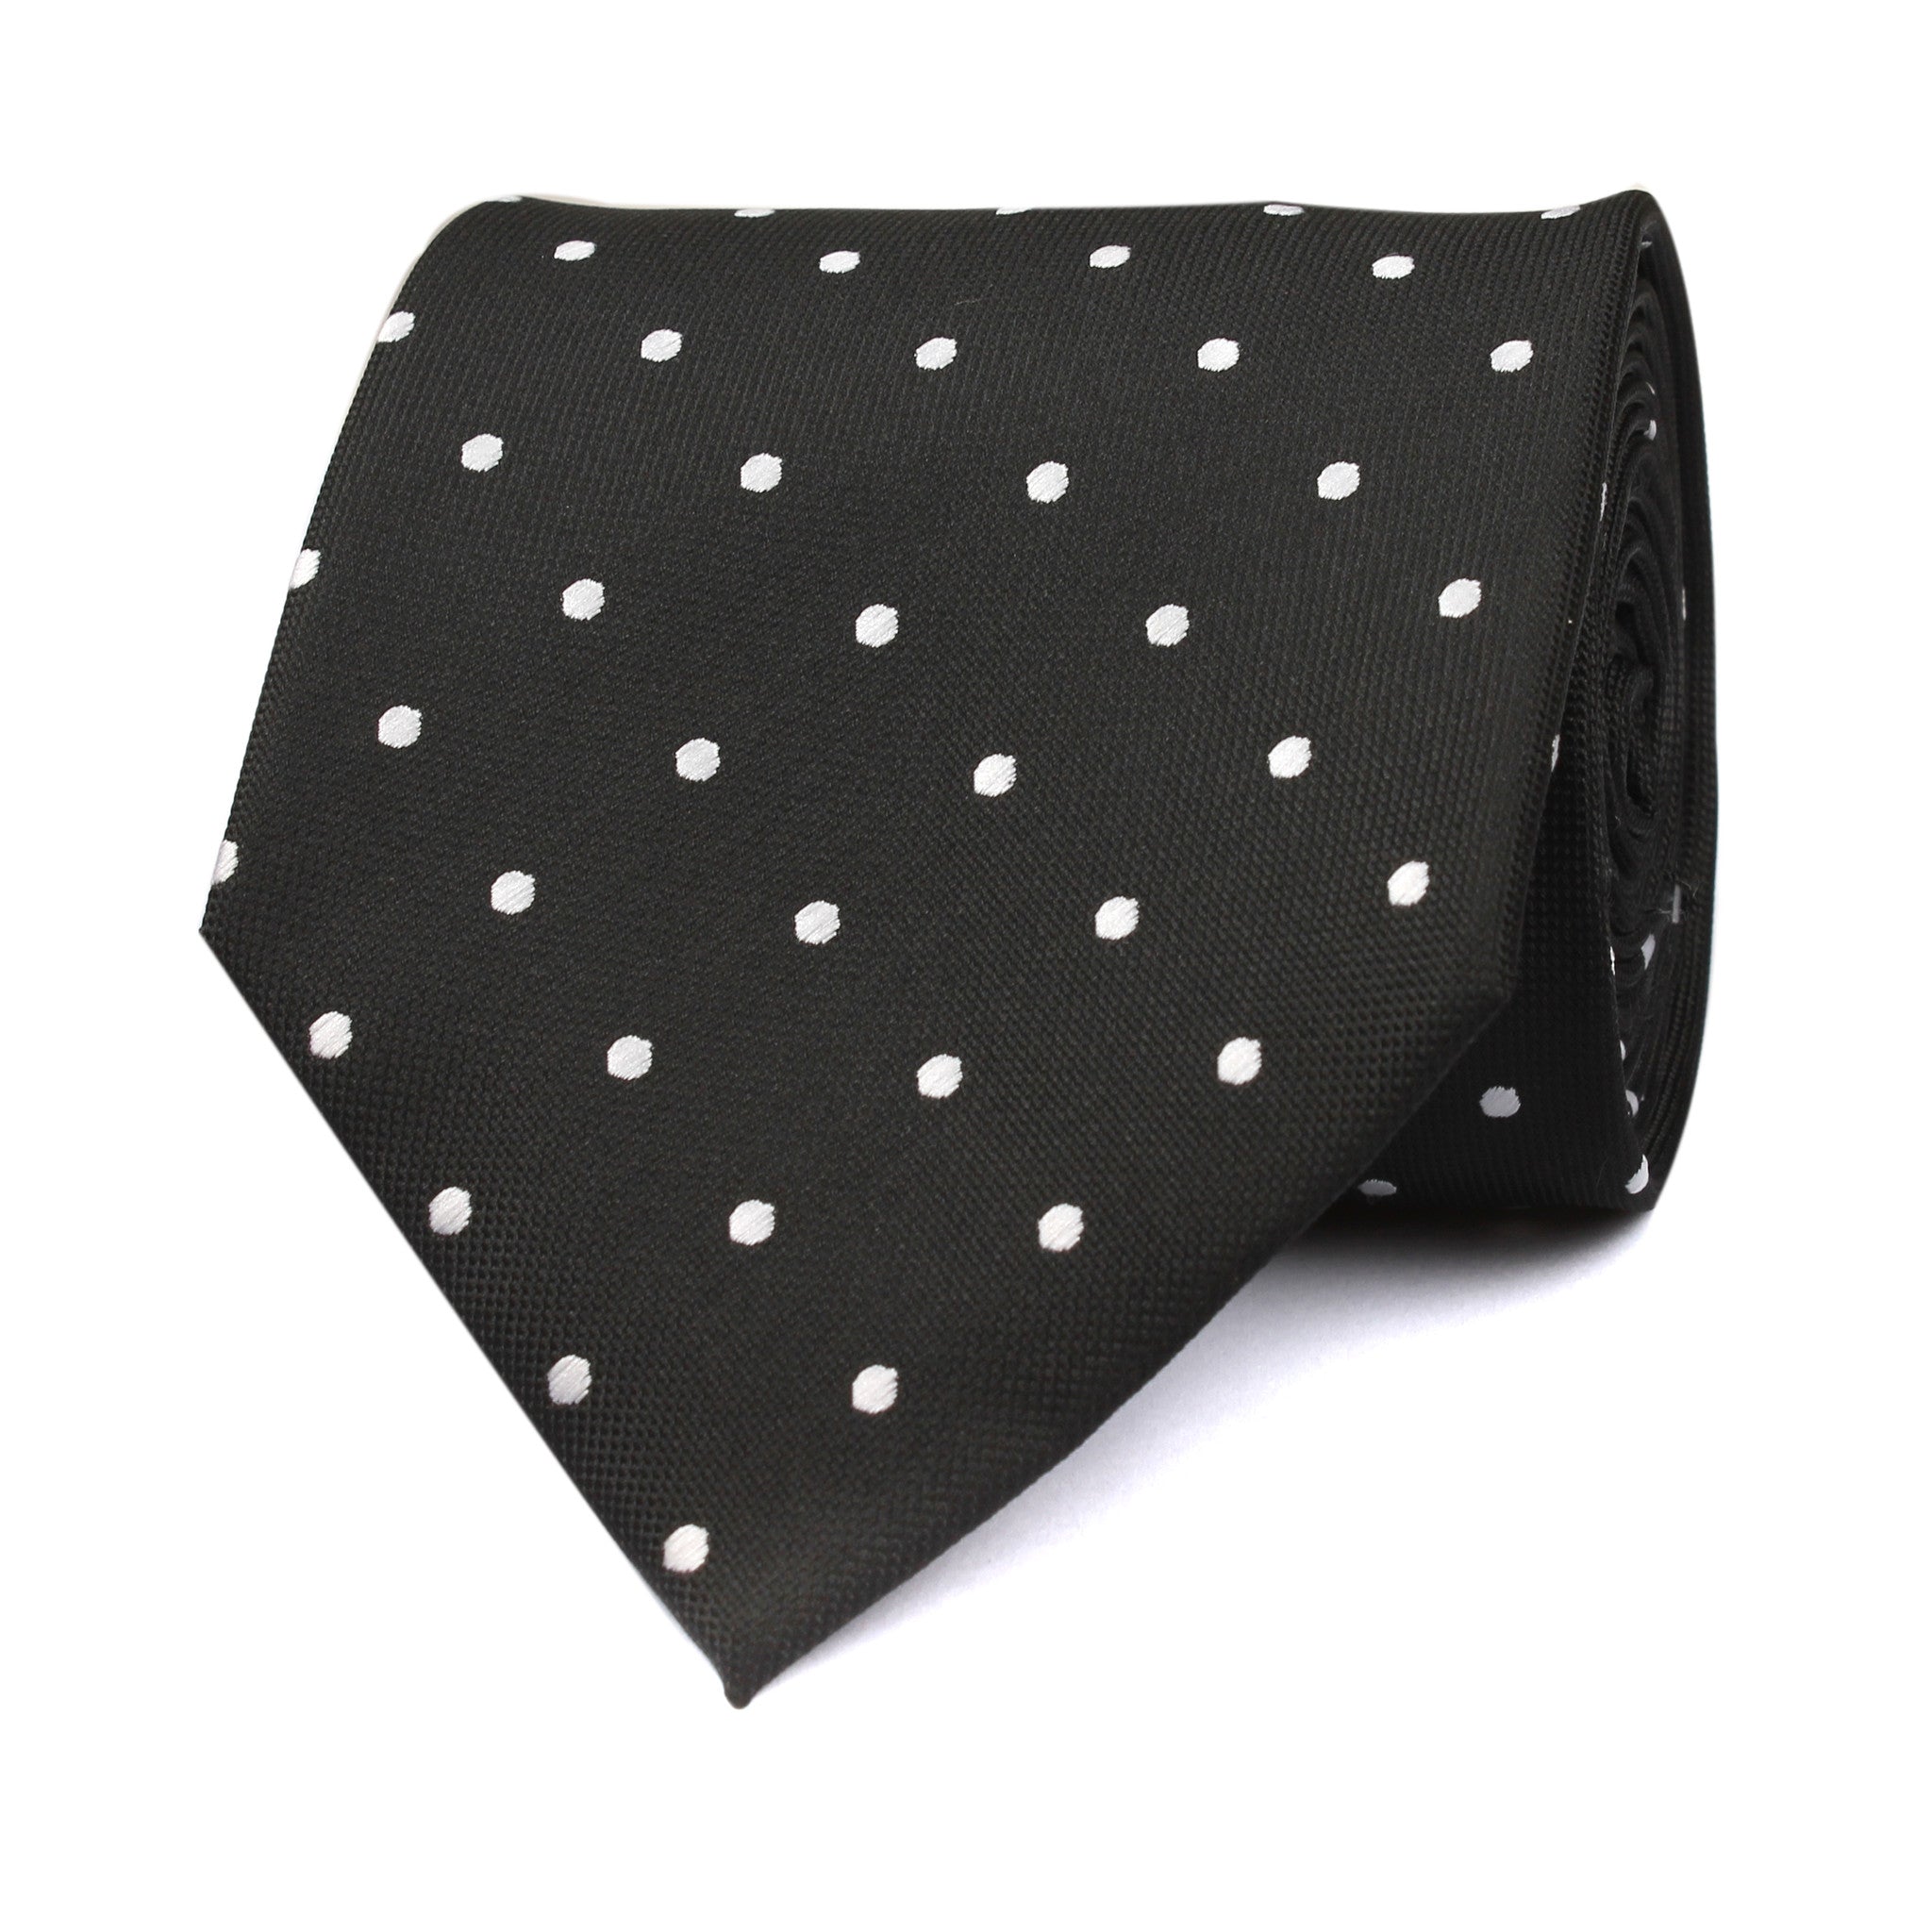 Coal Black with White Polka Dots Necktie Front View